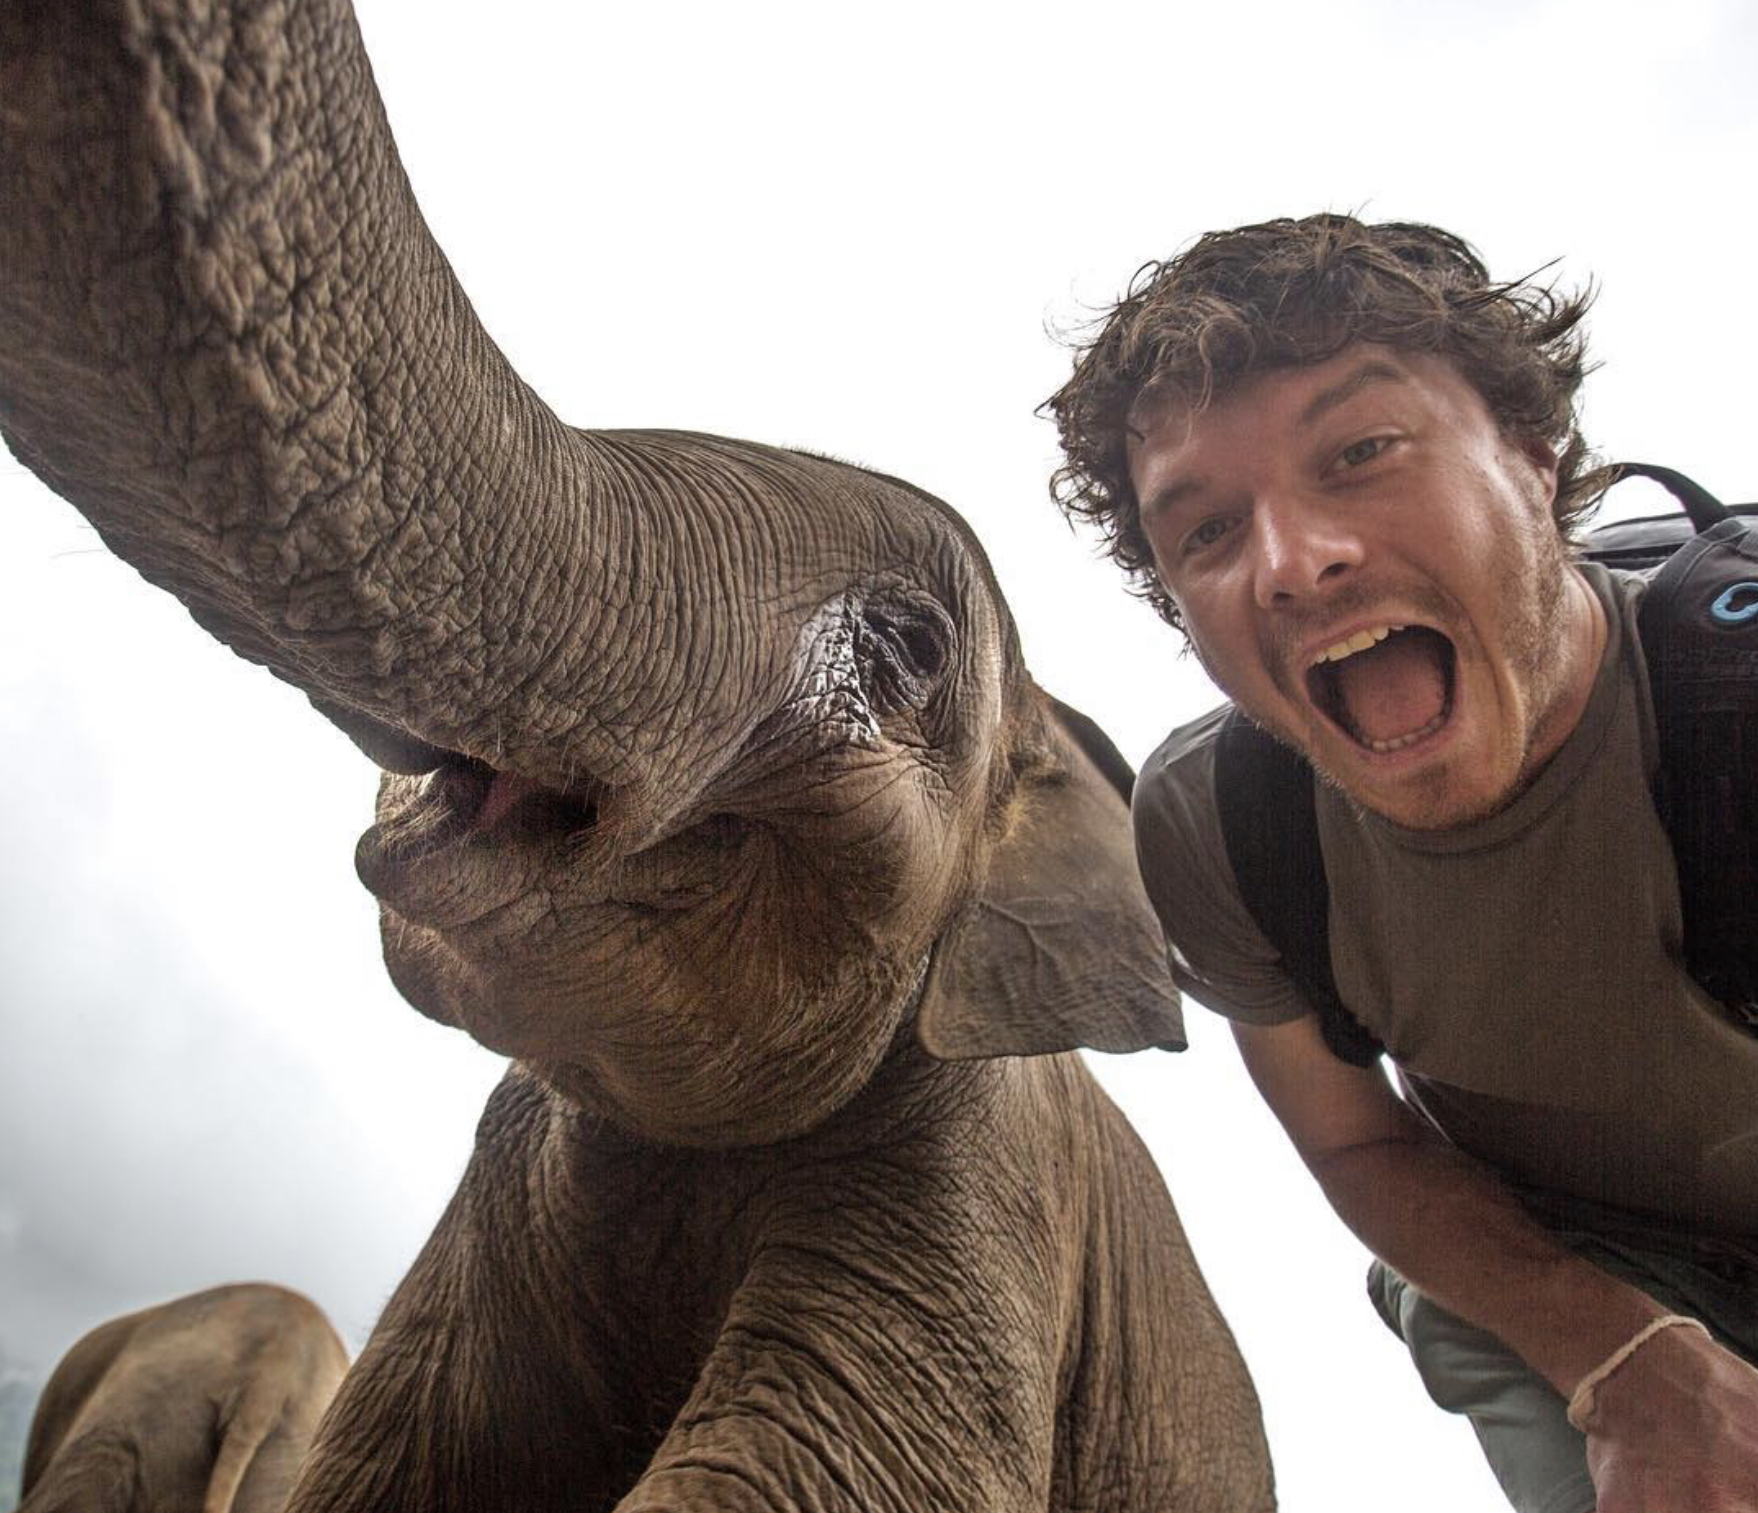 ‘Luckily had my camera and tried taking photos of them. But most of the animals were curious and got closer, wanting to sniff me and the camera. They didn’t fit in the picture so I flipped the camera around a took a selfie. The first selfie was with a baby camel in 2013 and have build a collection of over a 100 animal selfies.’ Including this elephant (not taken in Australia).